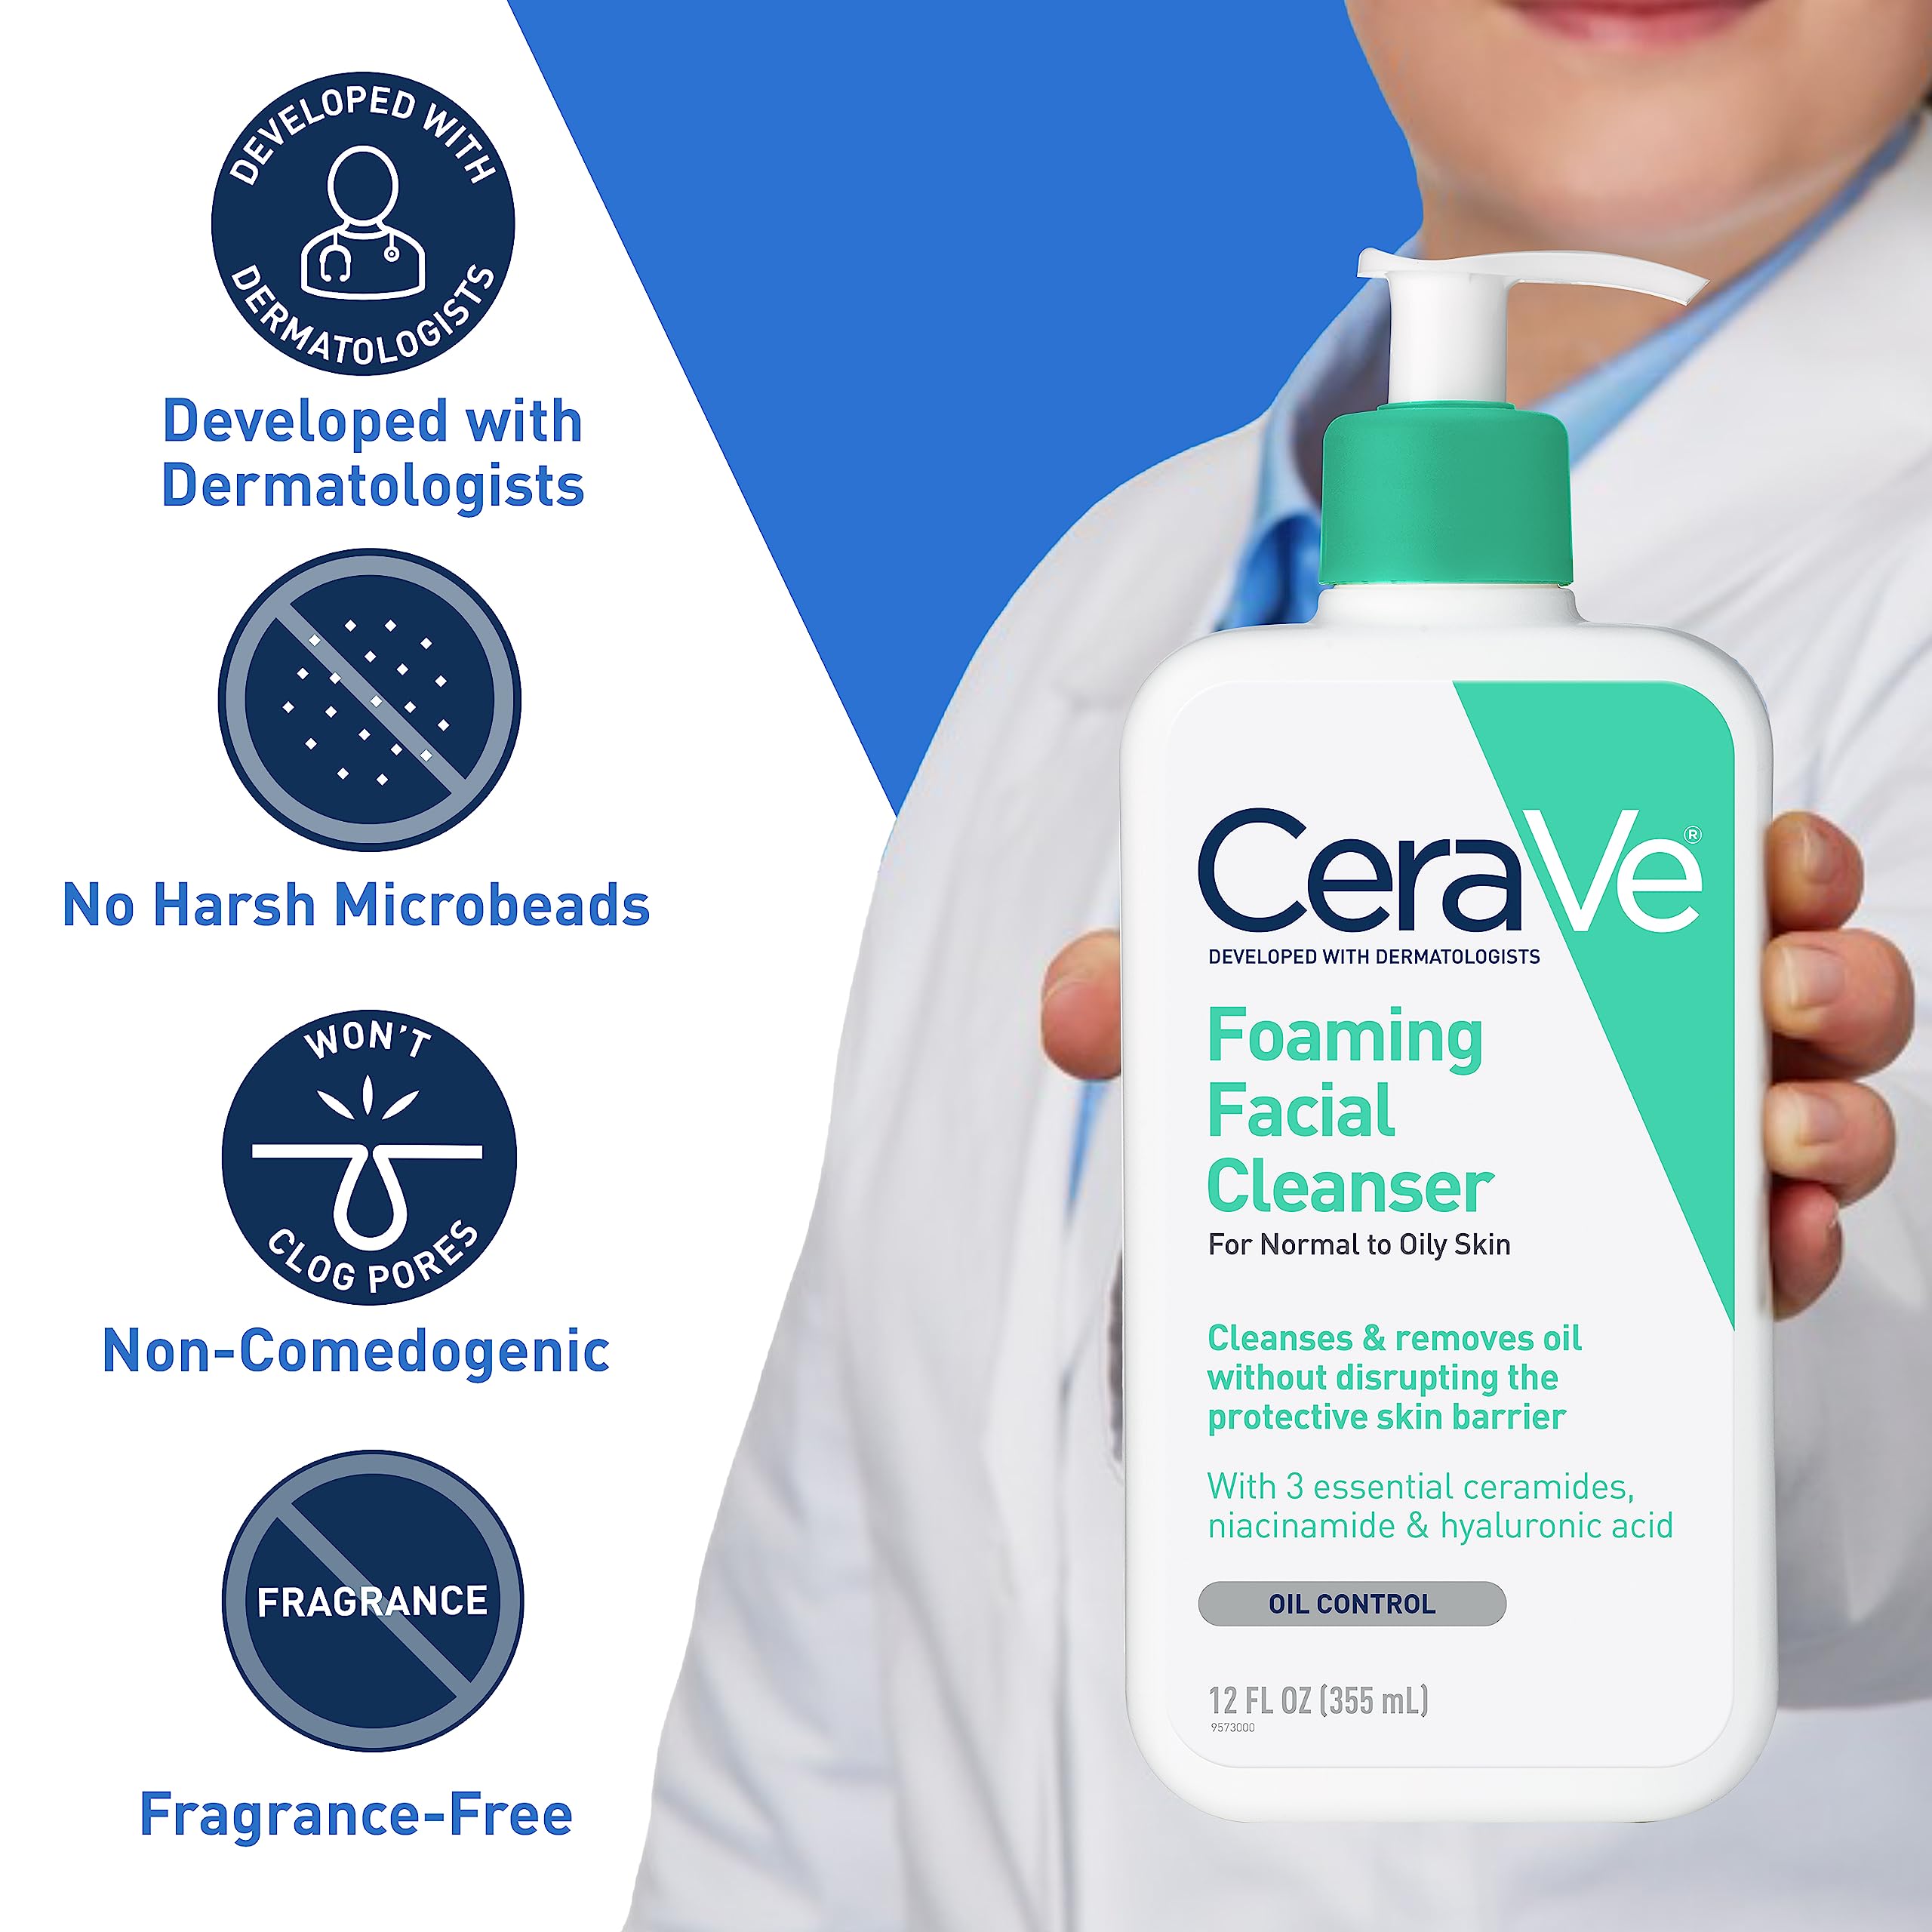 CeraVe Foaming Facial Cleanser | Daily Face Wash for Oily Skin with Hyaluronic Acid, Ceramides, and Niacinamide| Fragrance Free Paraben Free | 16 Fluid Ounce